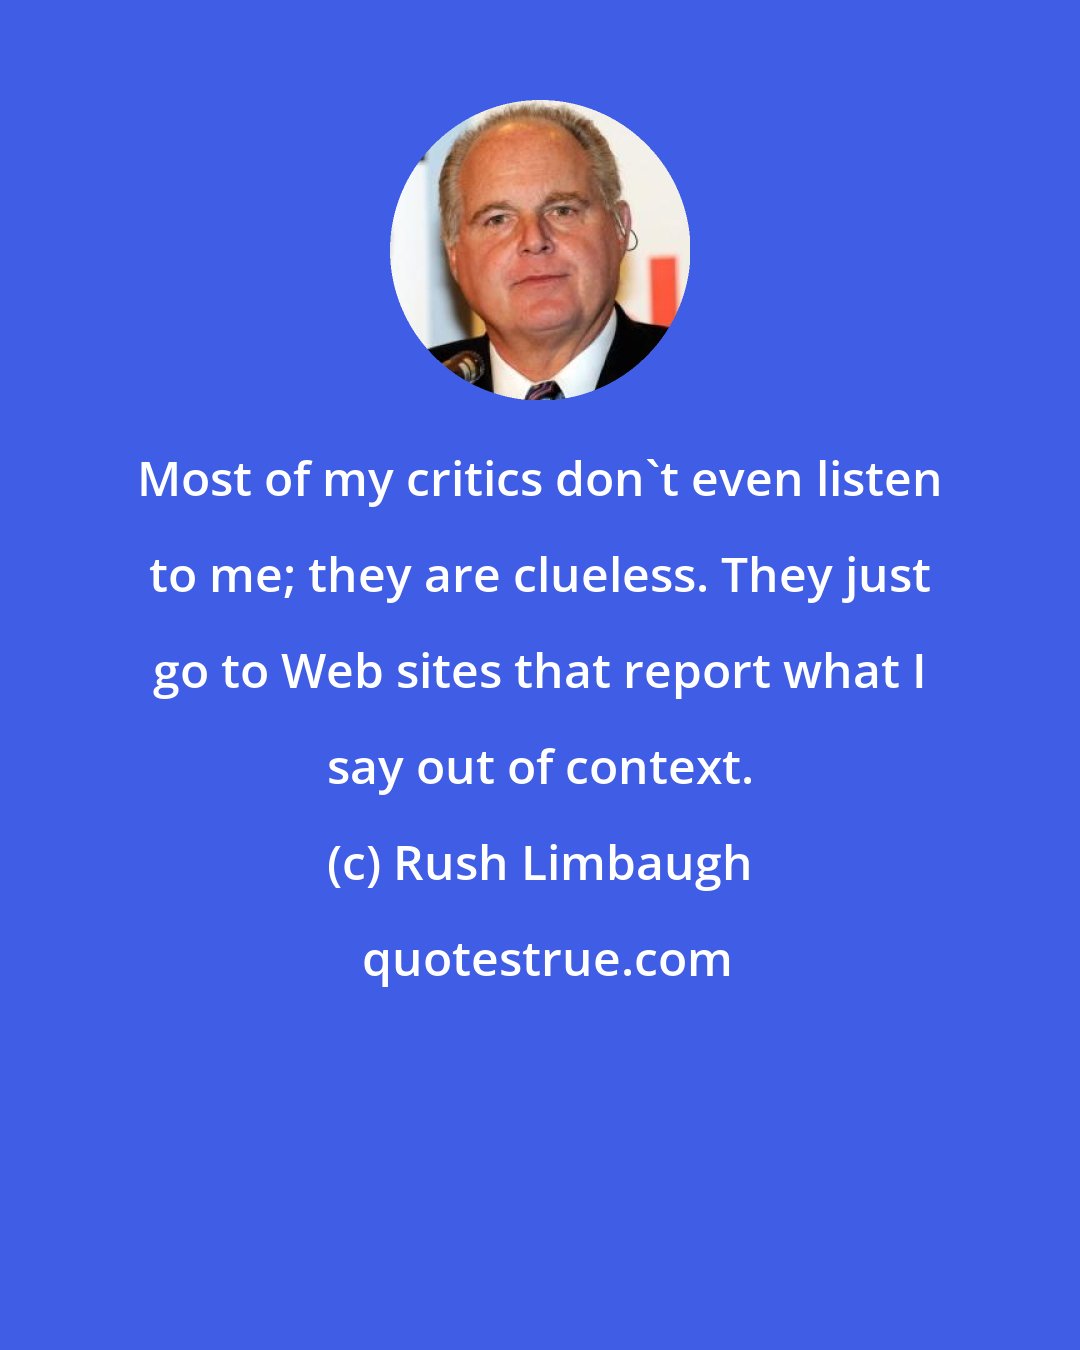 Rush Limbaugh: Most of my critics don't even listen to me; they are clueless. They just go to Web sites that report what I say out of context.